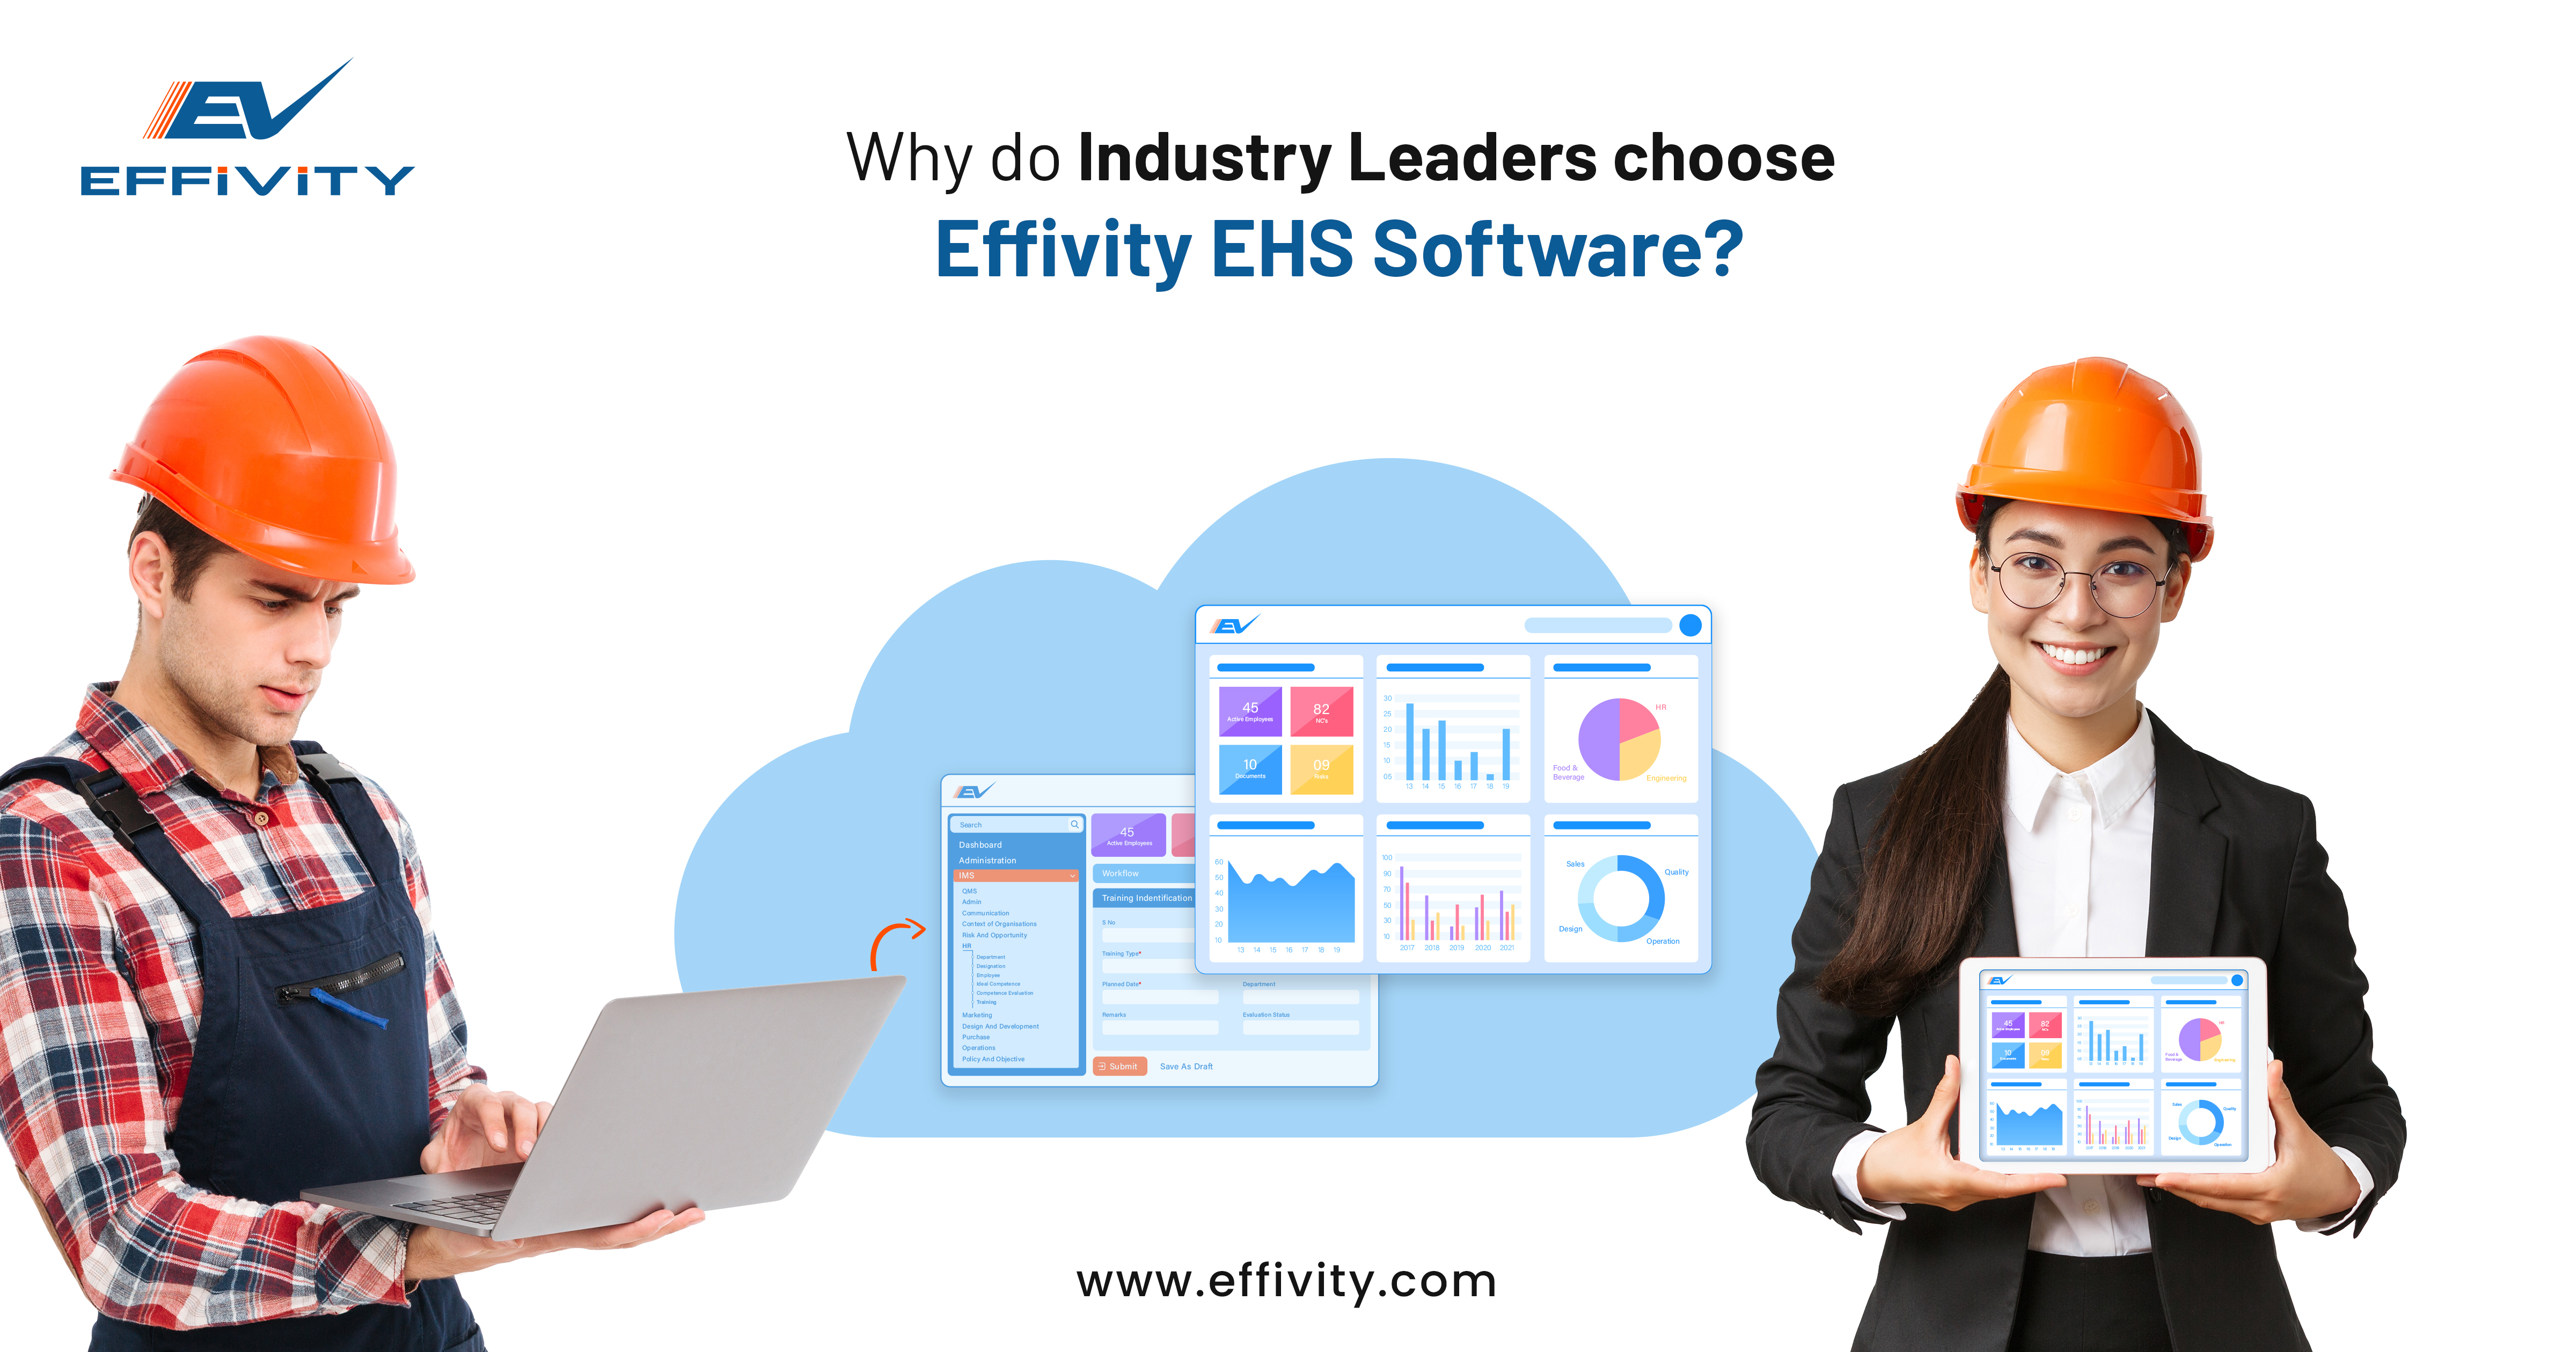 Why do industry leaders choose EHS Software?